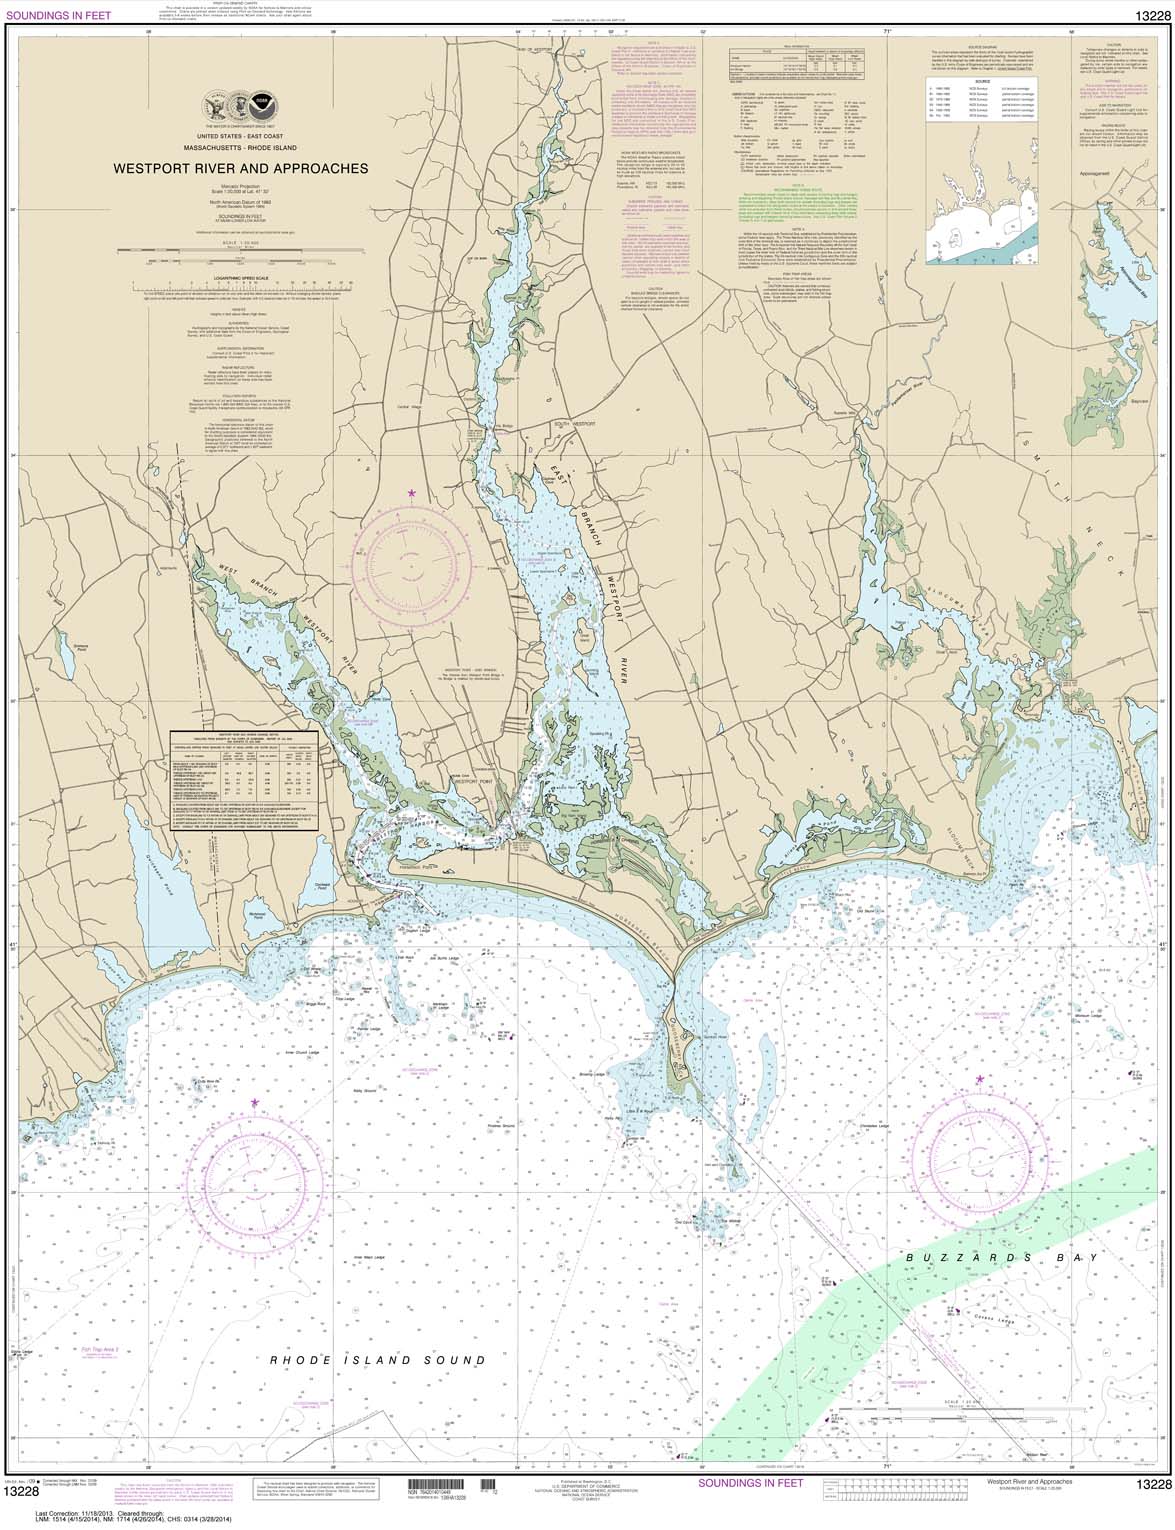 HISTORICAL NOAA Chart 13228: Westport River and Approaches